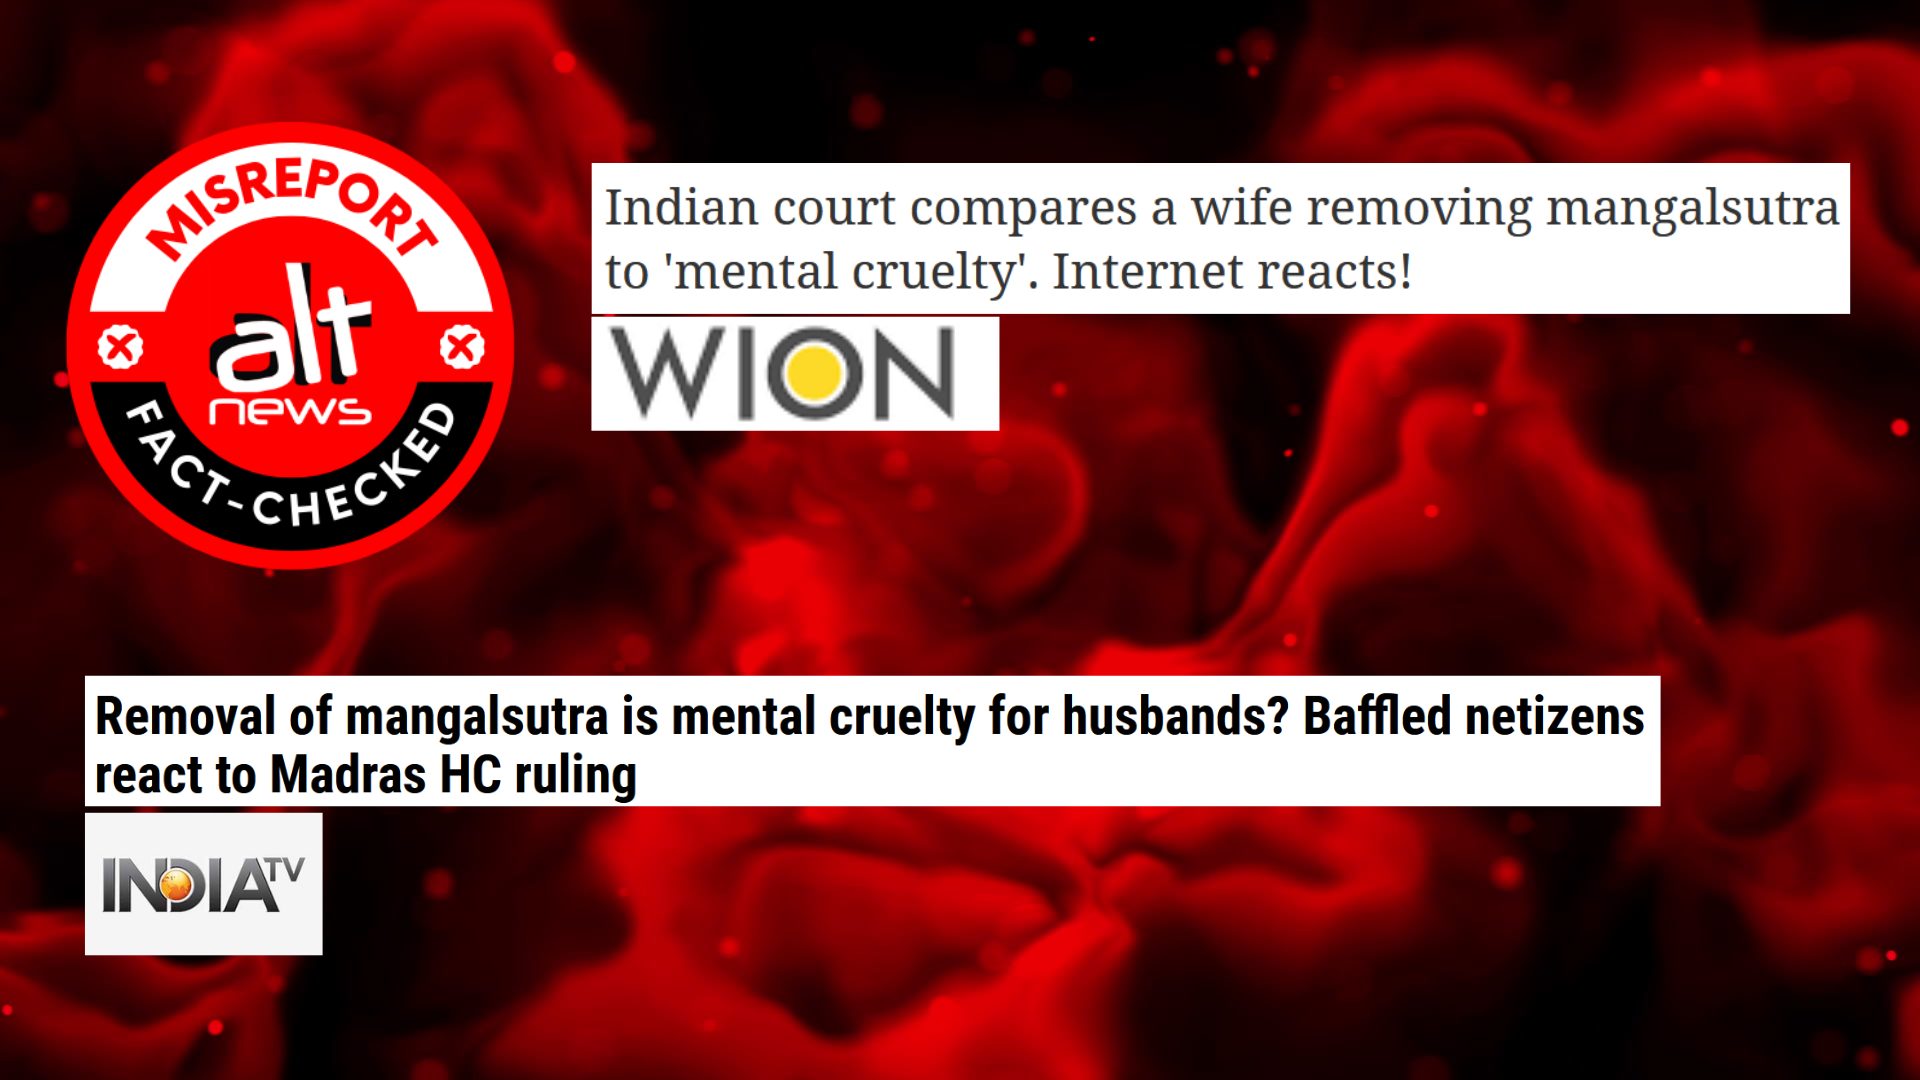 Fact-check: Did Madras HC say that removal of thali amounts to mental cruelty? - Alt News